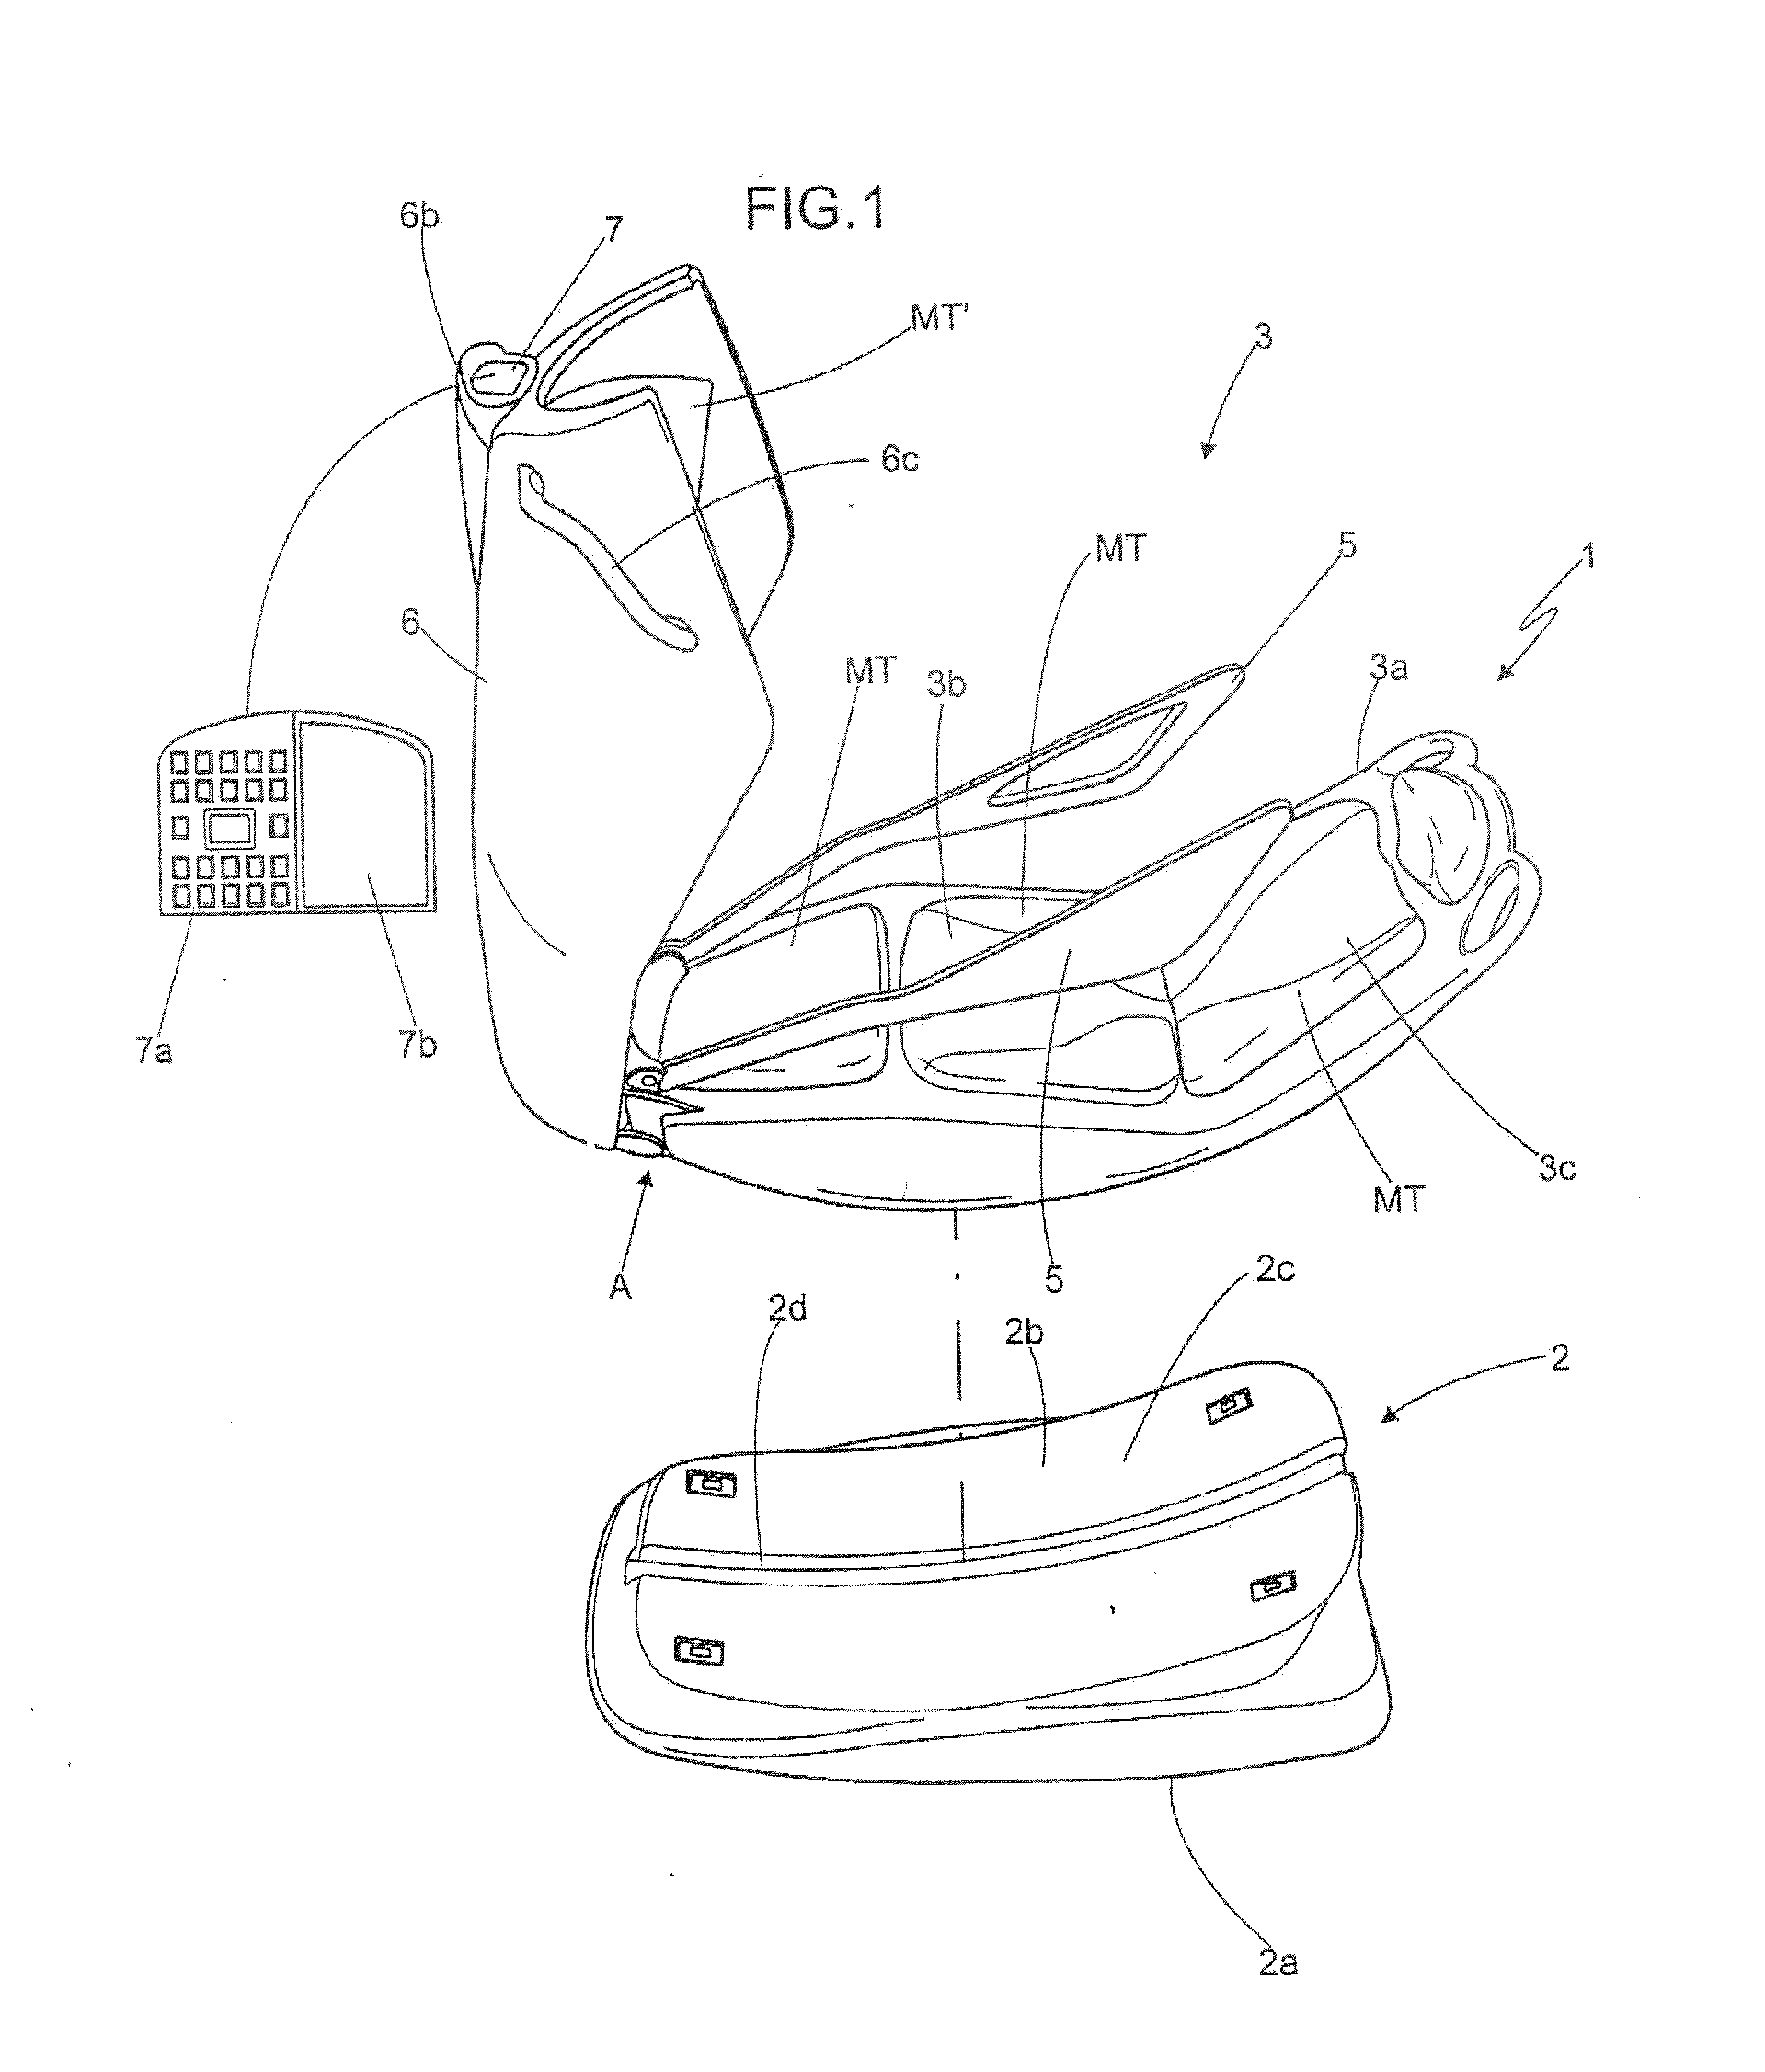 Capsular device for esthetic and therapeutic body treatment